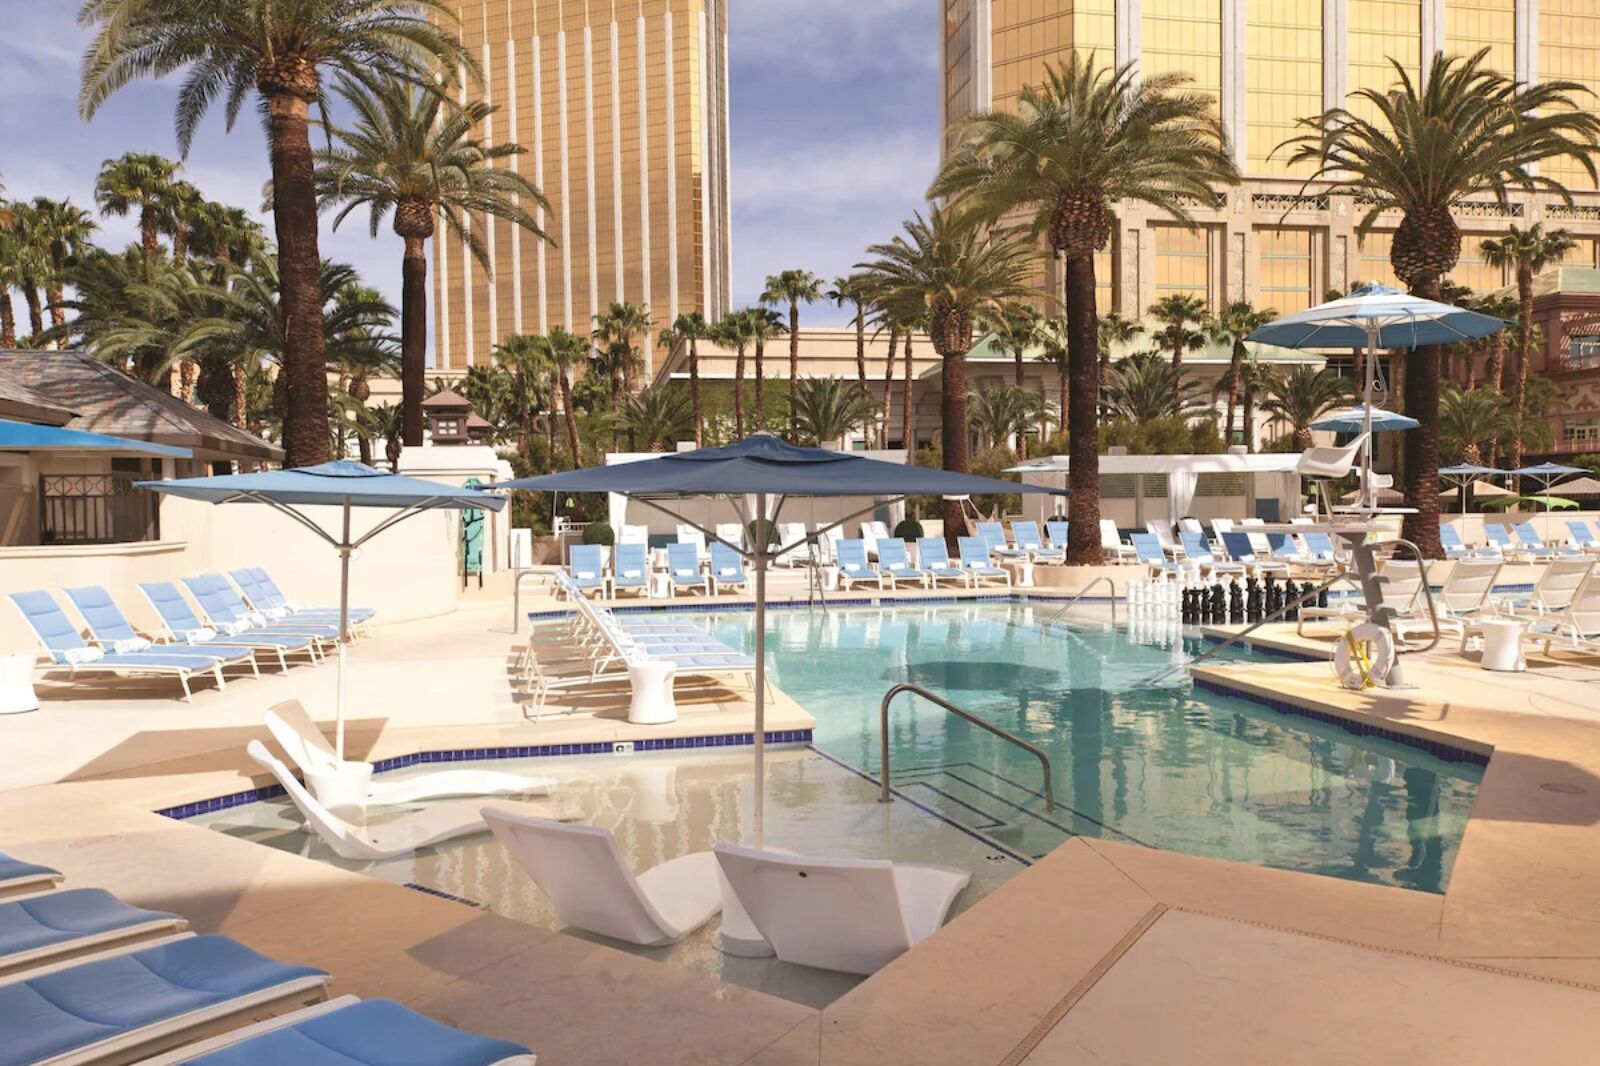 Pool at Delano Las Vegas at Mandalay Bay one the best places to stay in Las Vegas